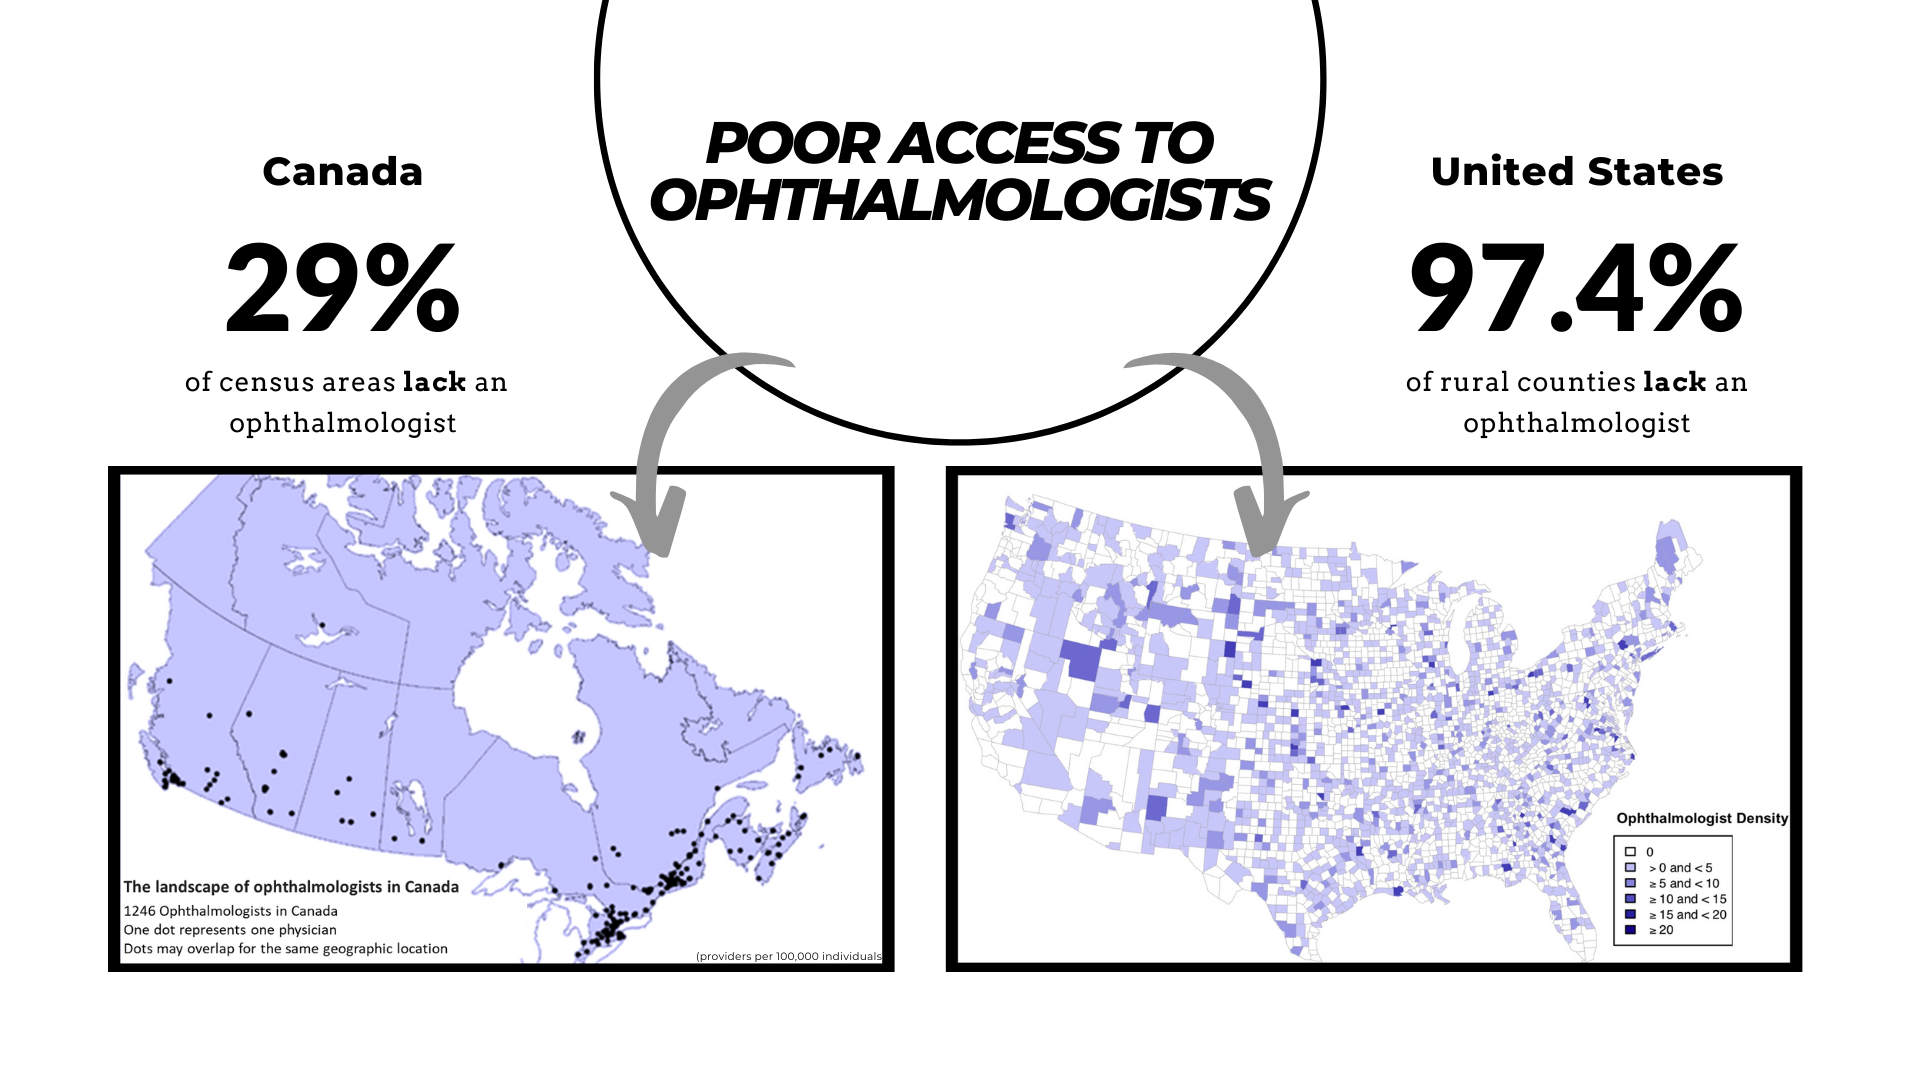 In Canada, 29% of census areas lack an opthalmologist. In the United States, 97.4% of rural counties lack an opthalmologist 